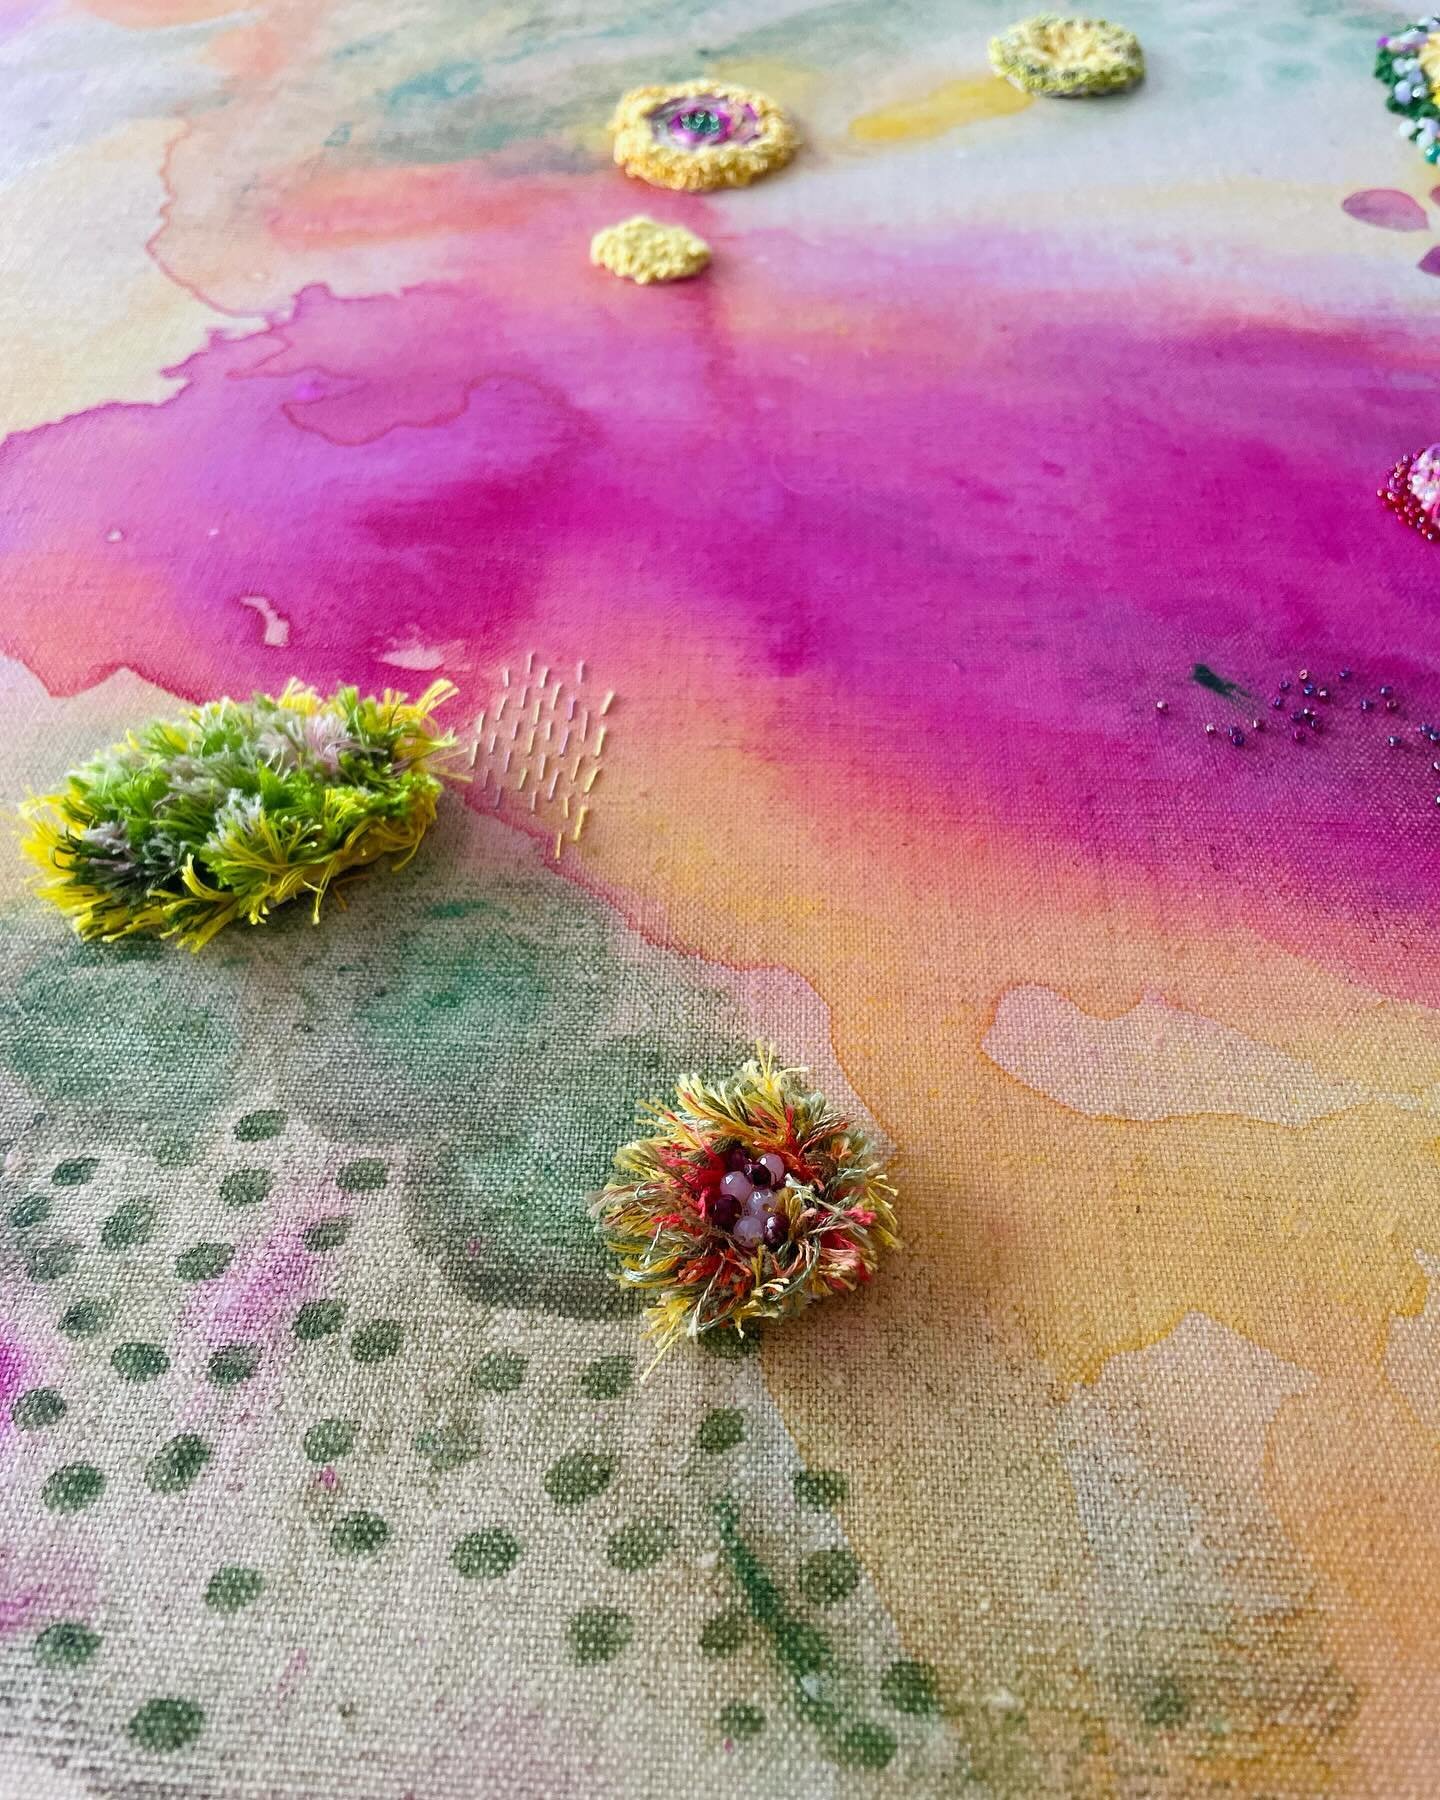 Washy layer upon layer of acrylic paint on Belgian linen canvas and then hand stitching and beading in textured elements in various threads and beads. This piece is still a WIP but it&rsquo;s already titled: &ldquo;Sherbert Shores&rdquo;.